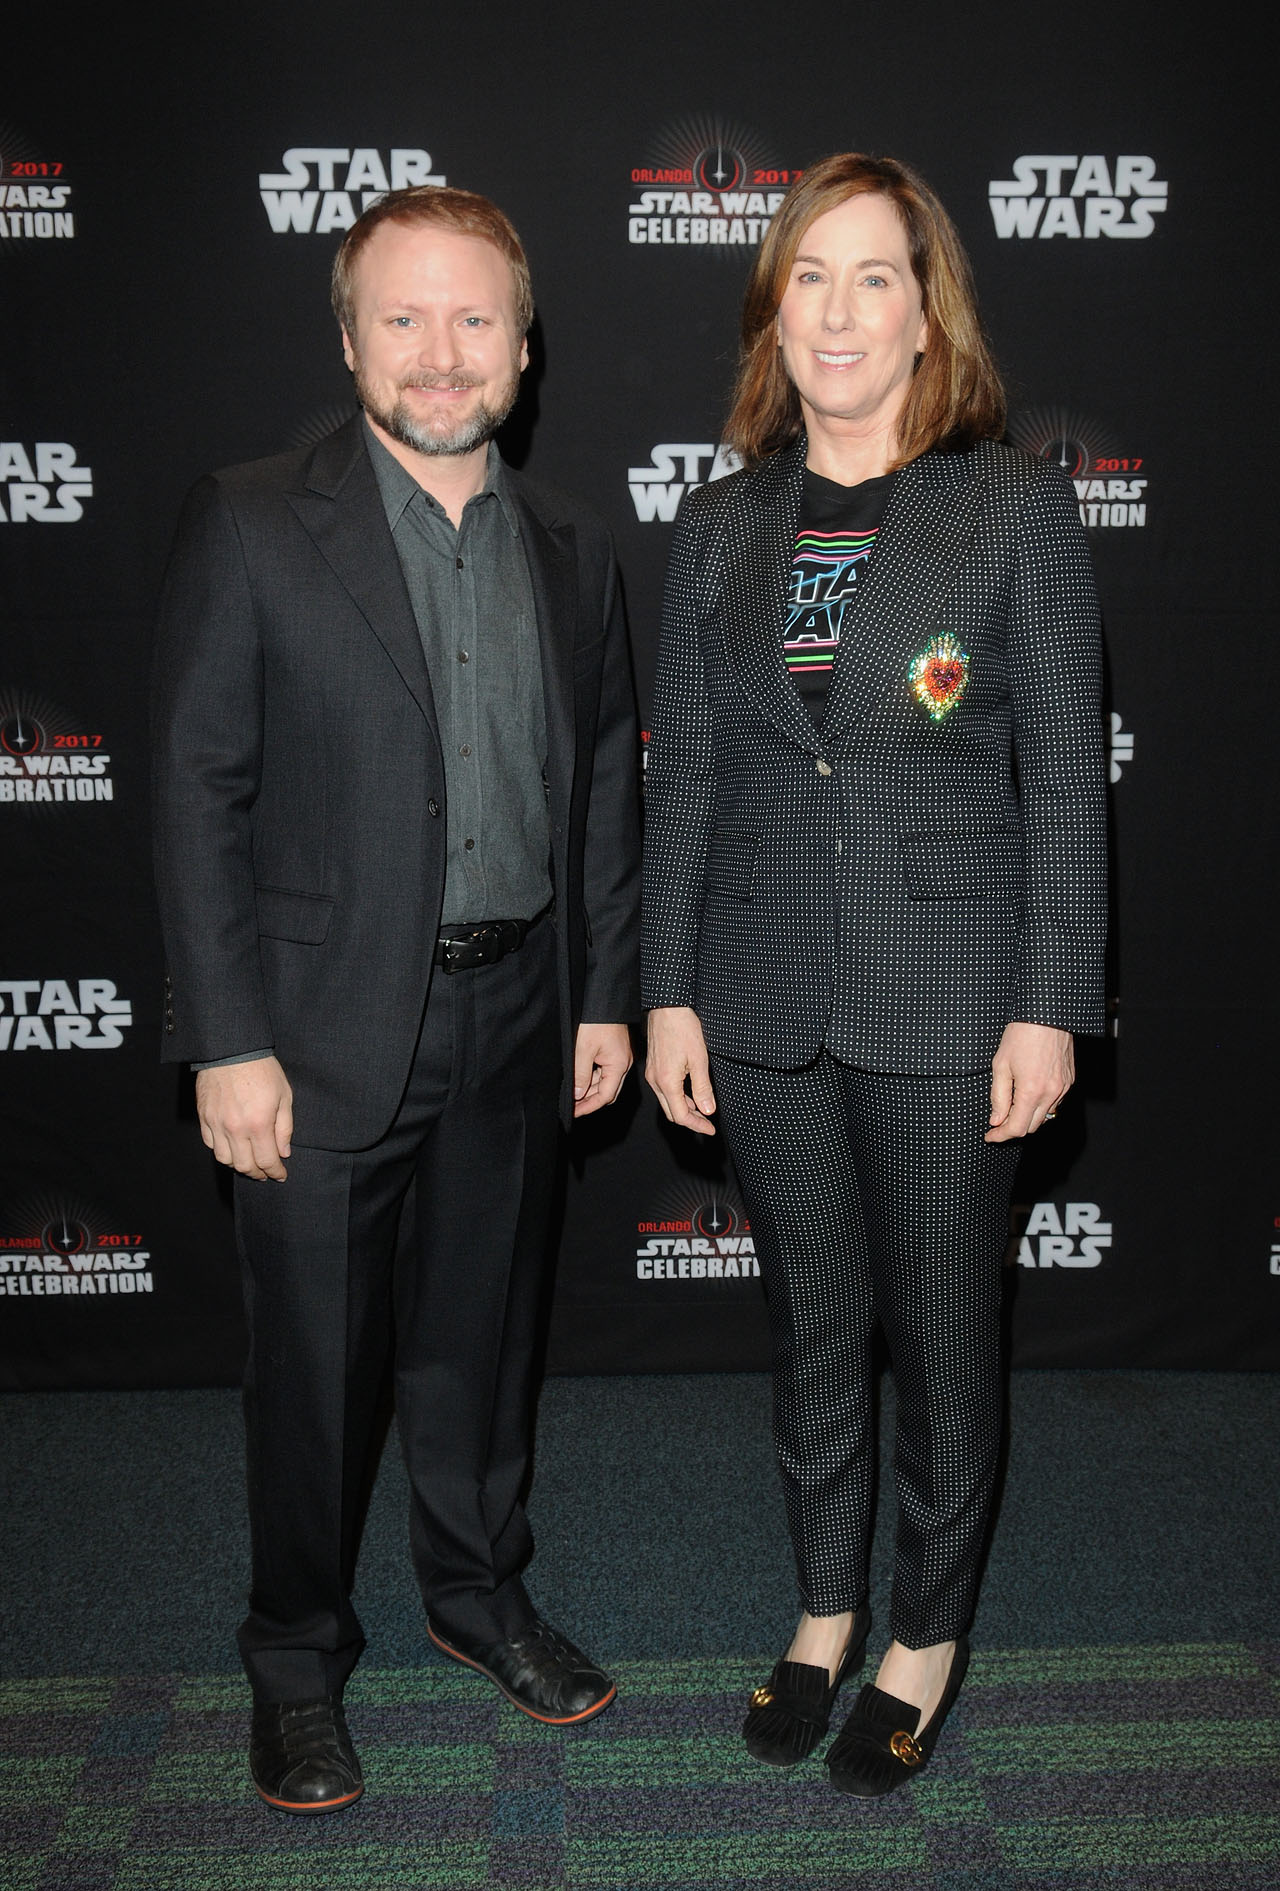 ORLANDO, FL - APRIL 14:  Rian Johnson and Kathleen Kennedy attend the STAR WARS: THE LAST JEDI PANEL during the 2017 STAR WARS CELEBRATION at Orange County Convention Center on April 14, 2017 in Orlando, Florida.  (Photo by Gerardo Mora/Getty Images for Disney) *** Local Caption *** Rian Johnson, Kathleen Kennedy